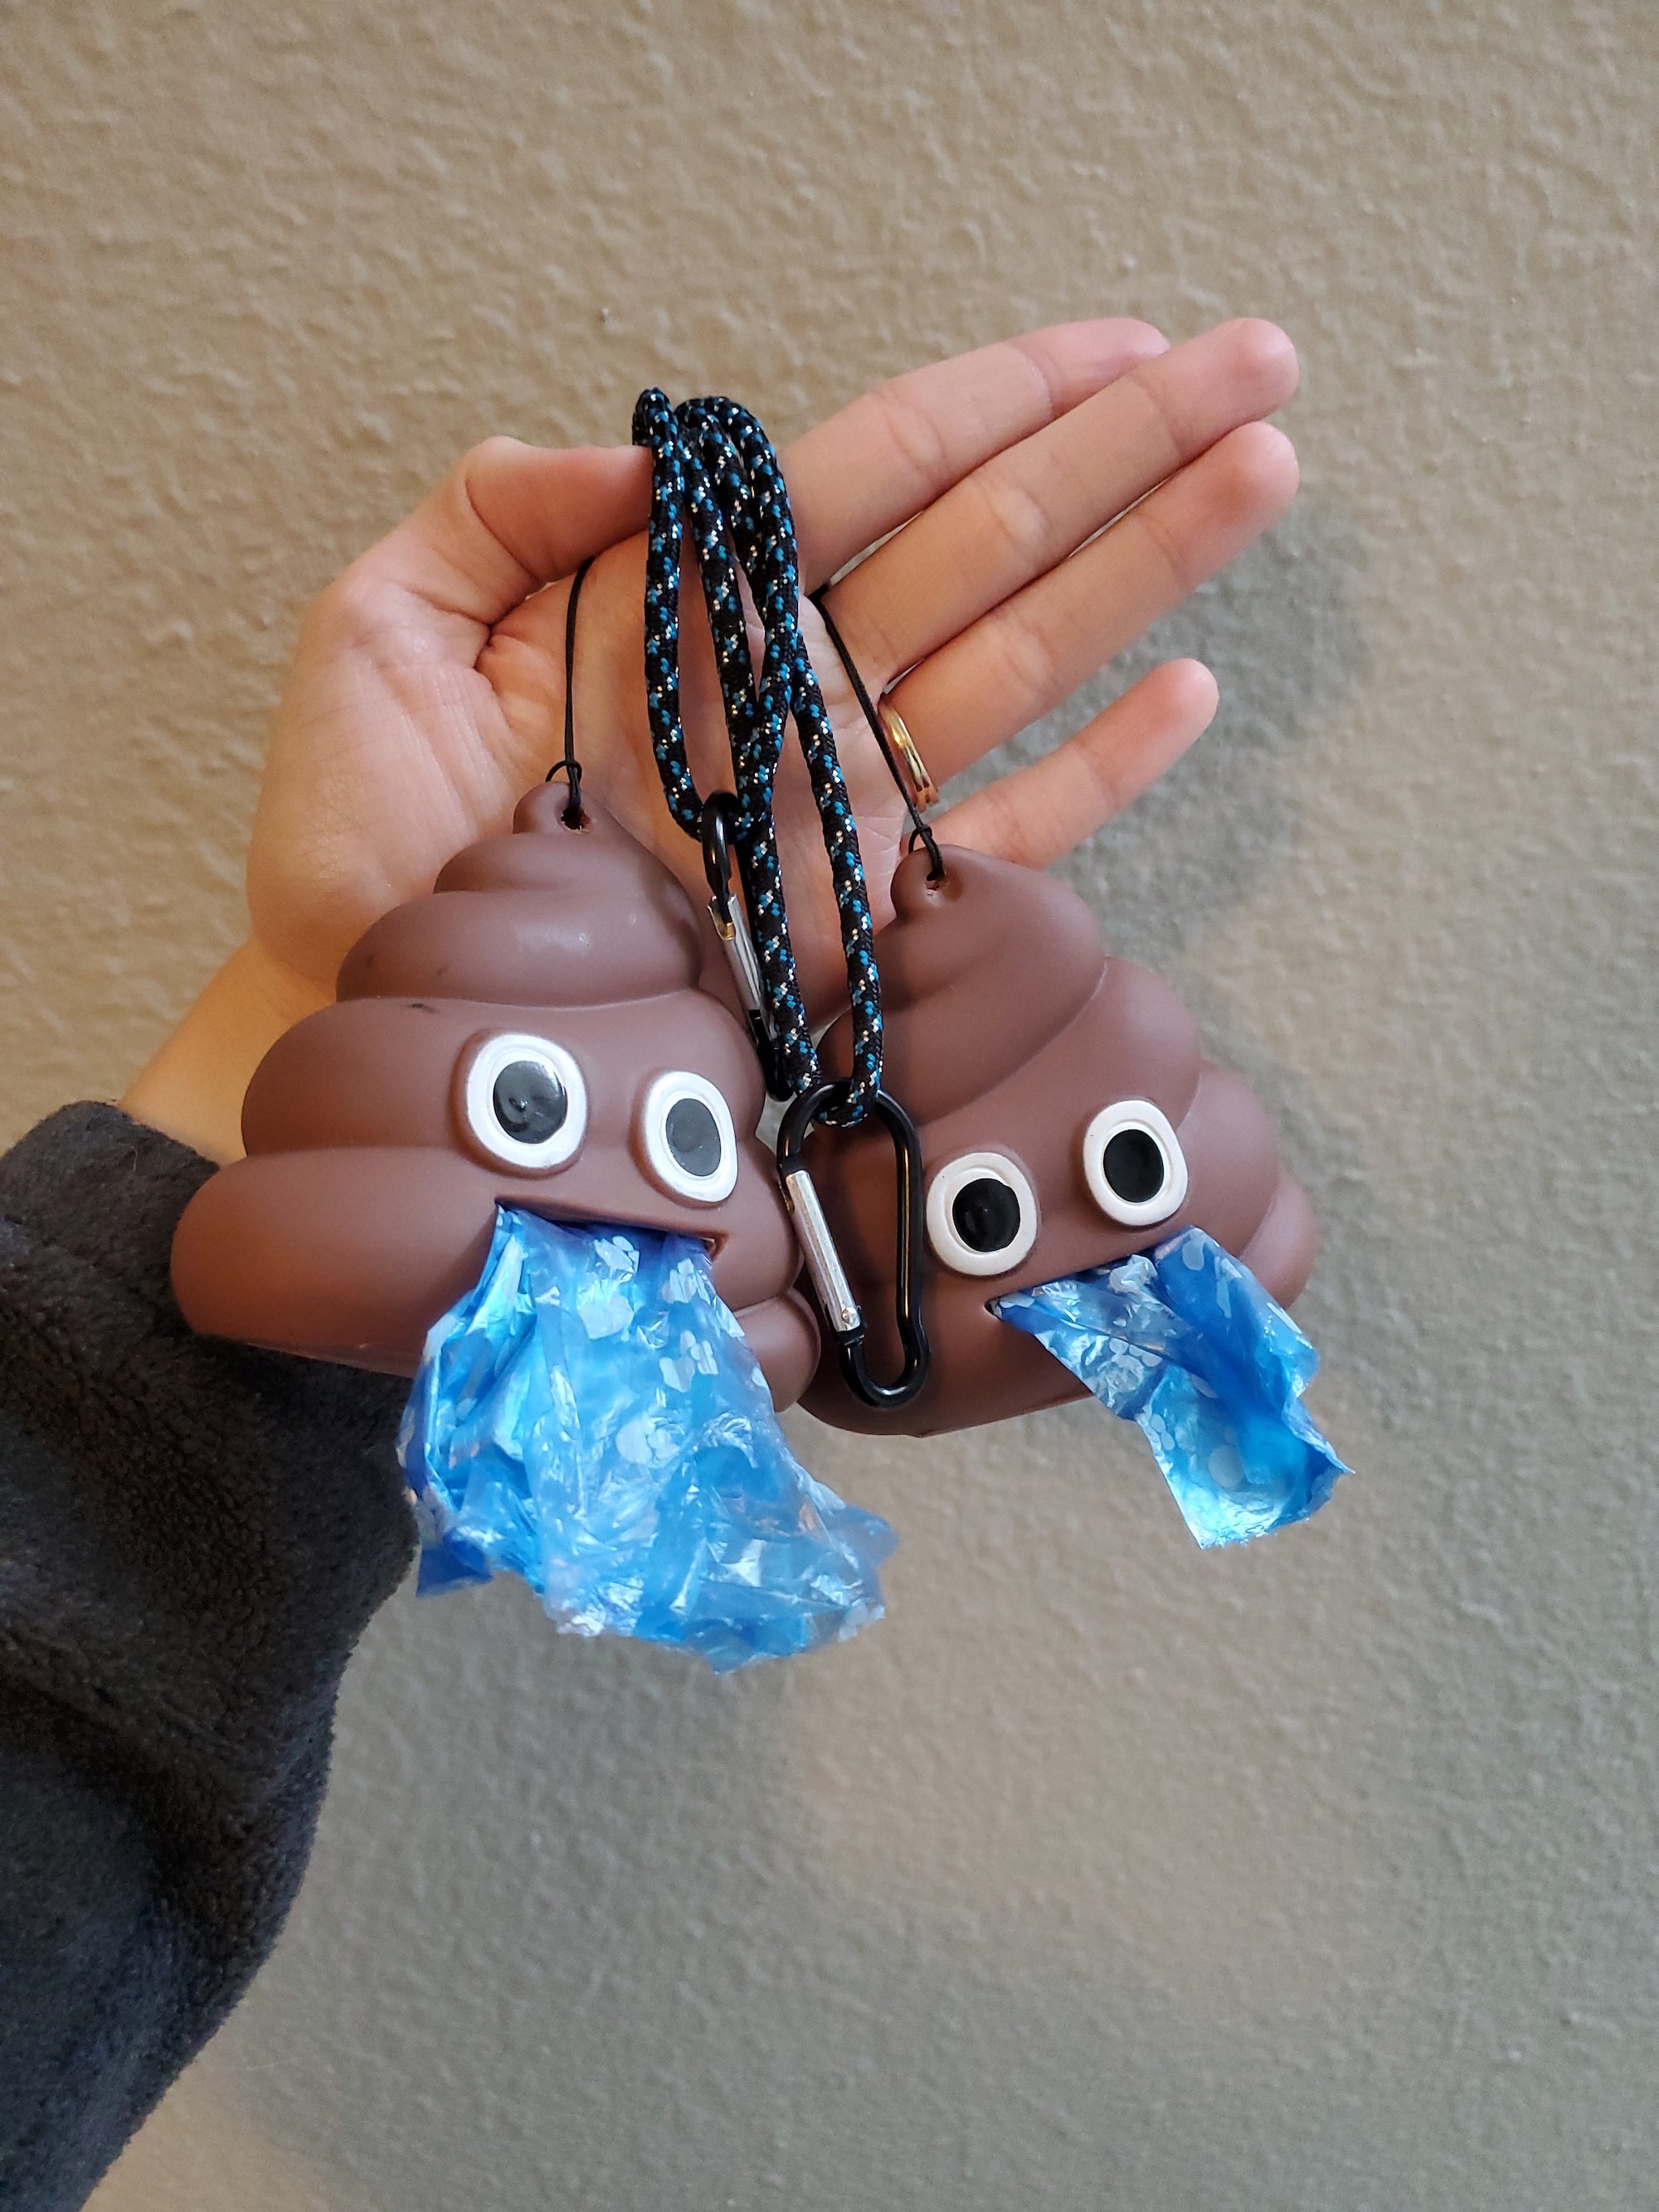 Hilarious Gift Ideas for Poop Joke Enthusiasts